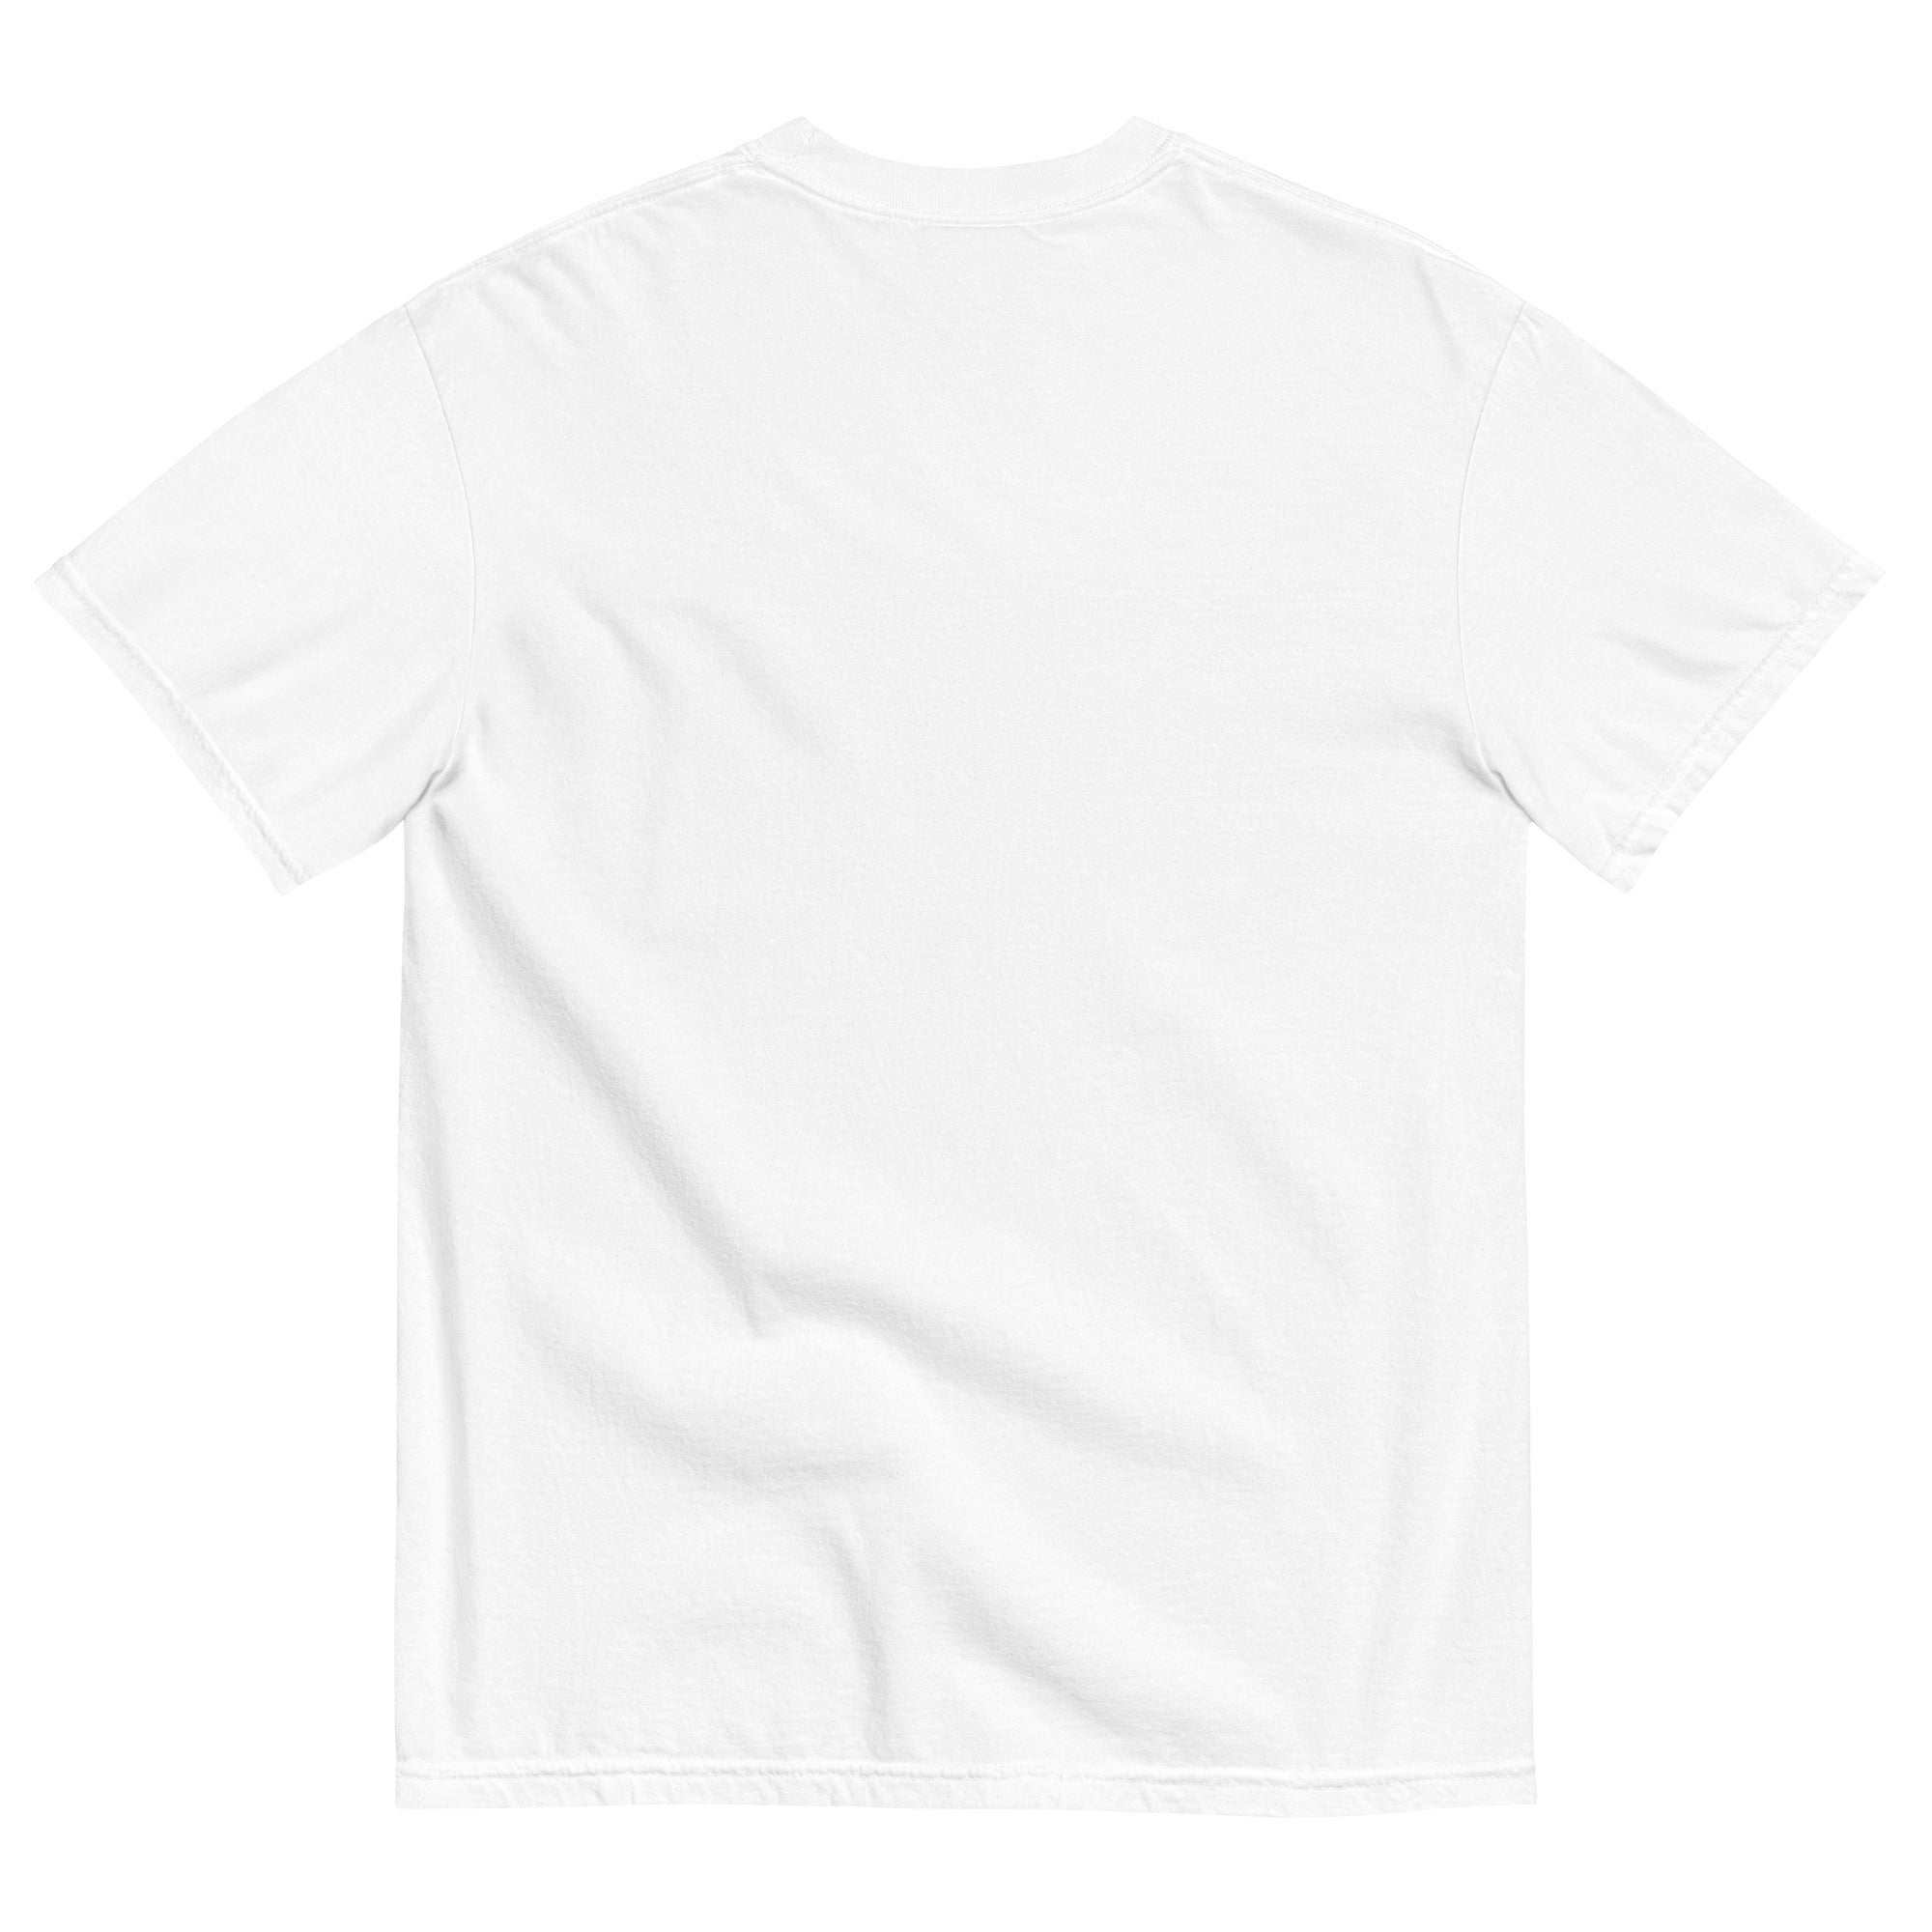 Can't Relate Relaxed Tee